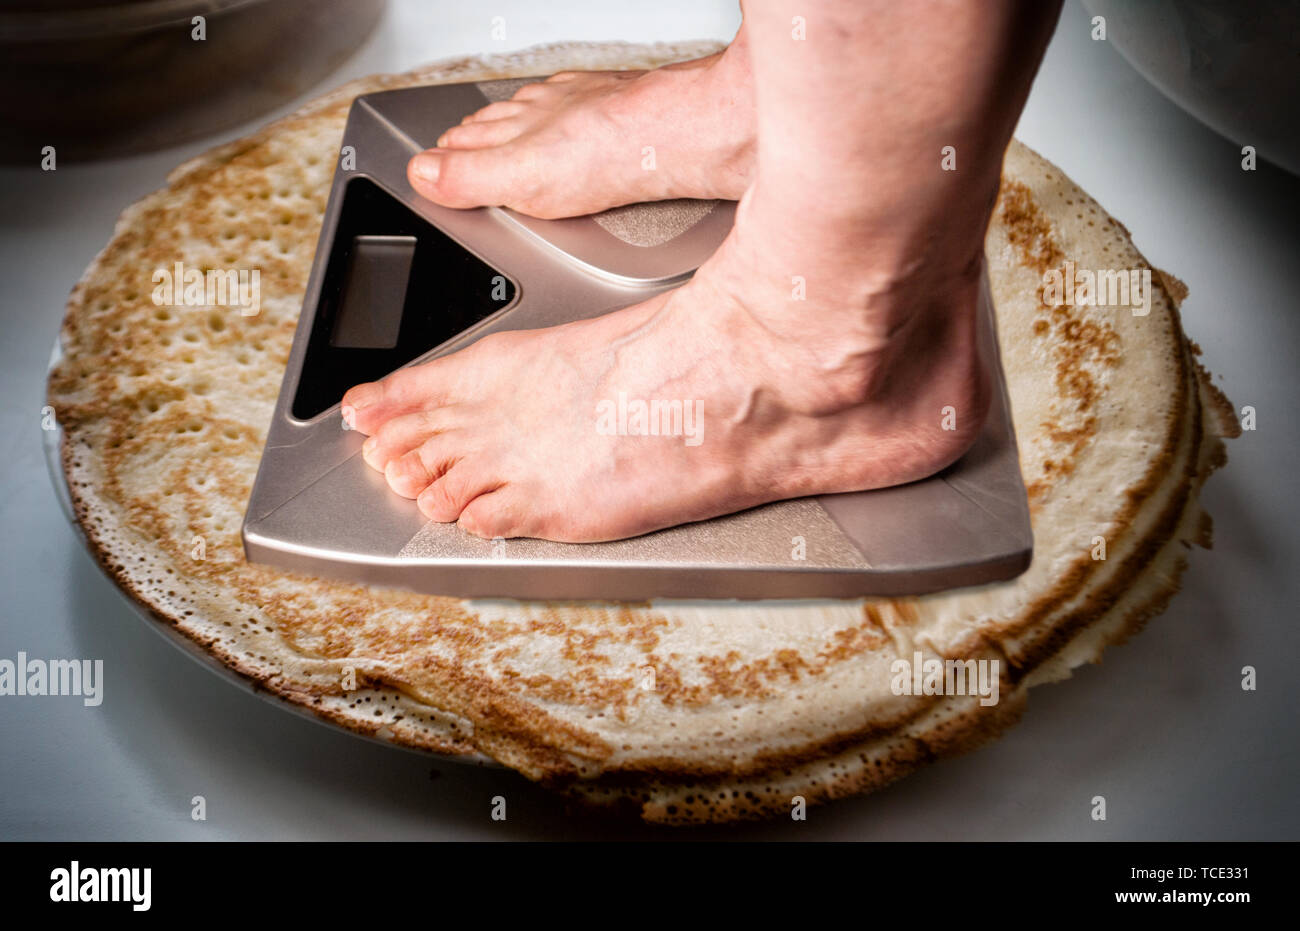 https://c8.alamy.com/comp/TCE331/bathroom-scales-for-weighing-human-weight-healthy-lifestyle-concept-TCE331.jpg